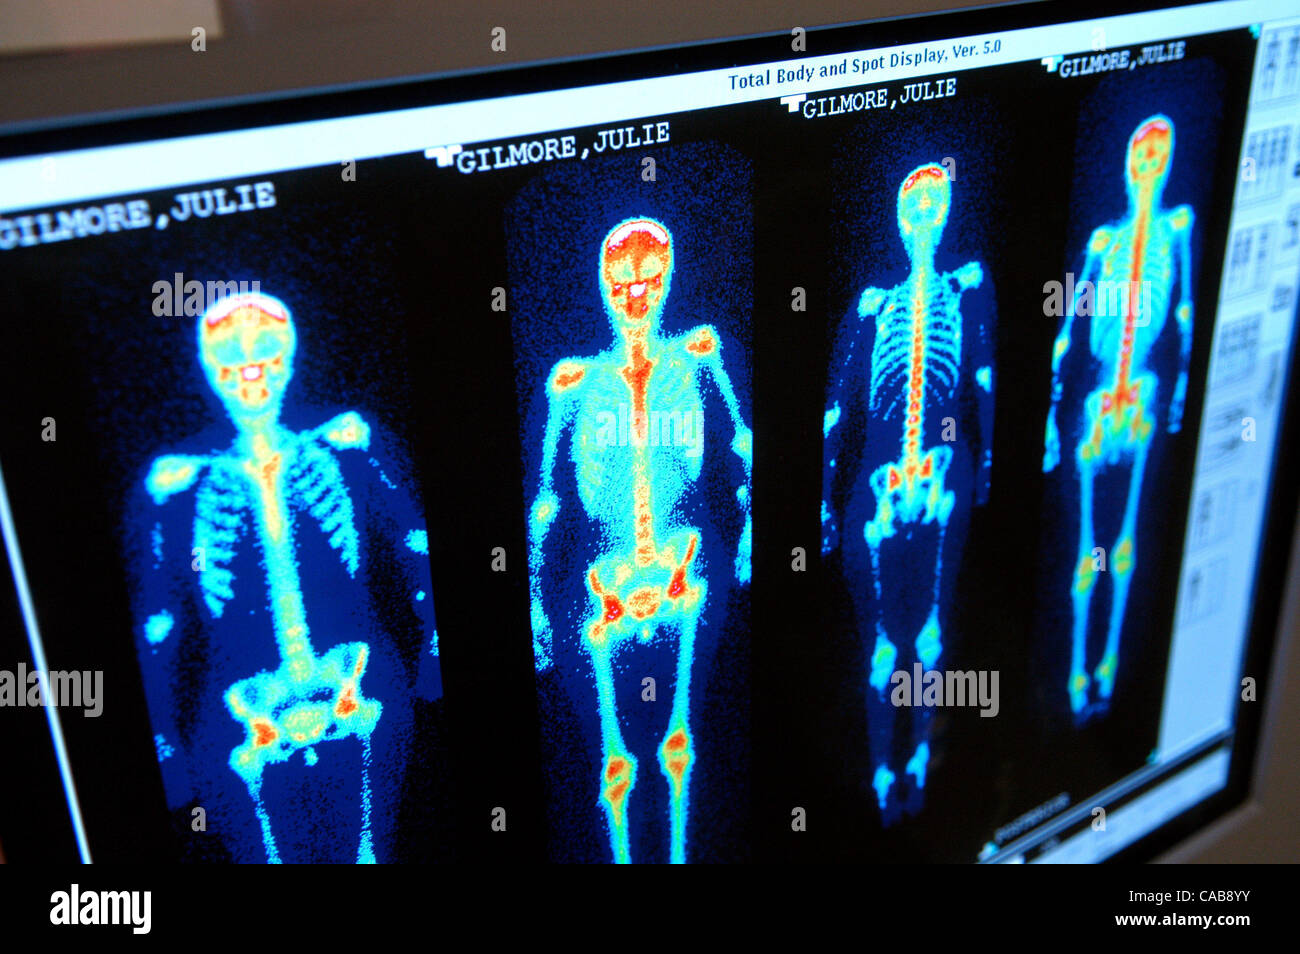 May 25, 2004; Marietta, GA, USA; Lung cancer patient JULIE GILMORE, 36, has a bone scan in the nuclear medicine department of Marietta Hospital. A computer screen shows the bone scan images. Stock Photo